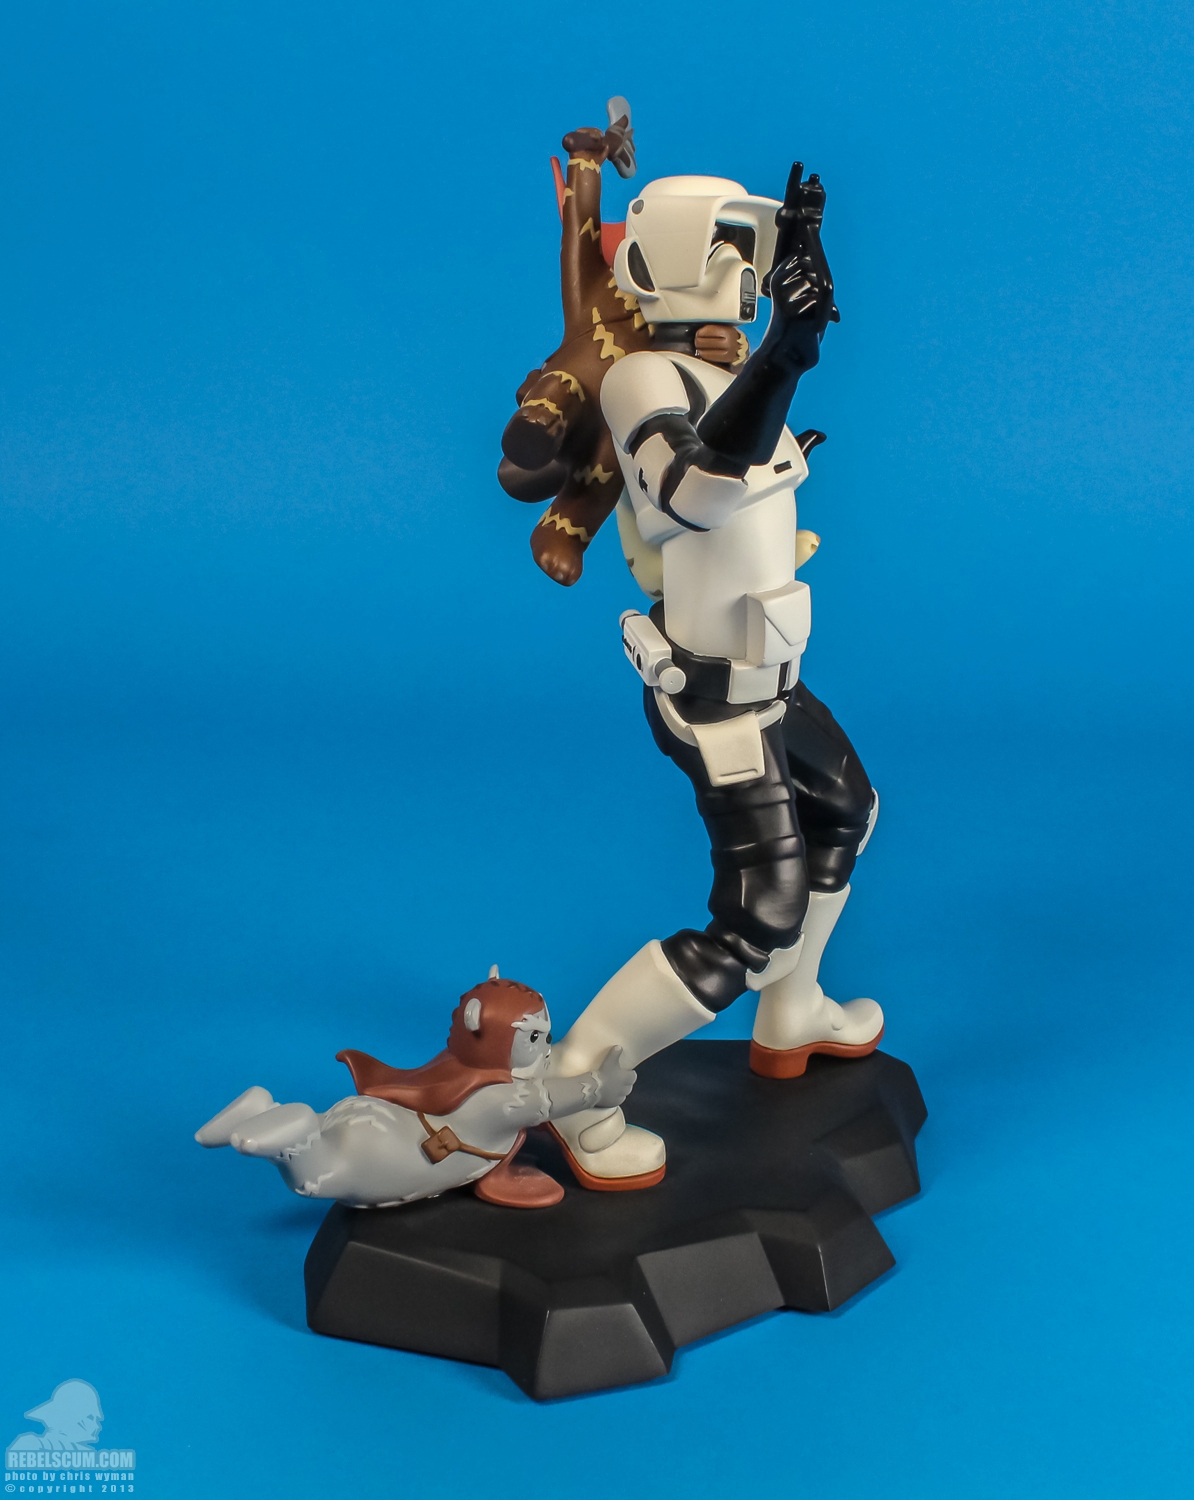 Scout_Trooper_Ewok Attack_Animated_Maquette_Gentle_Giant_Ltd-02.jpg